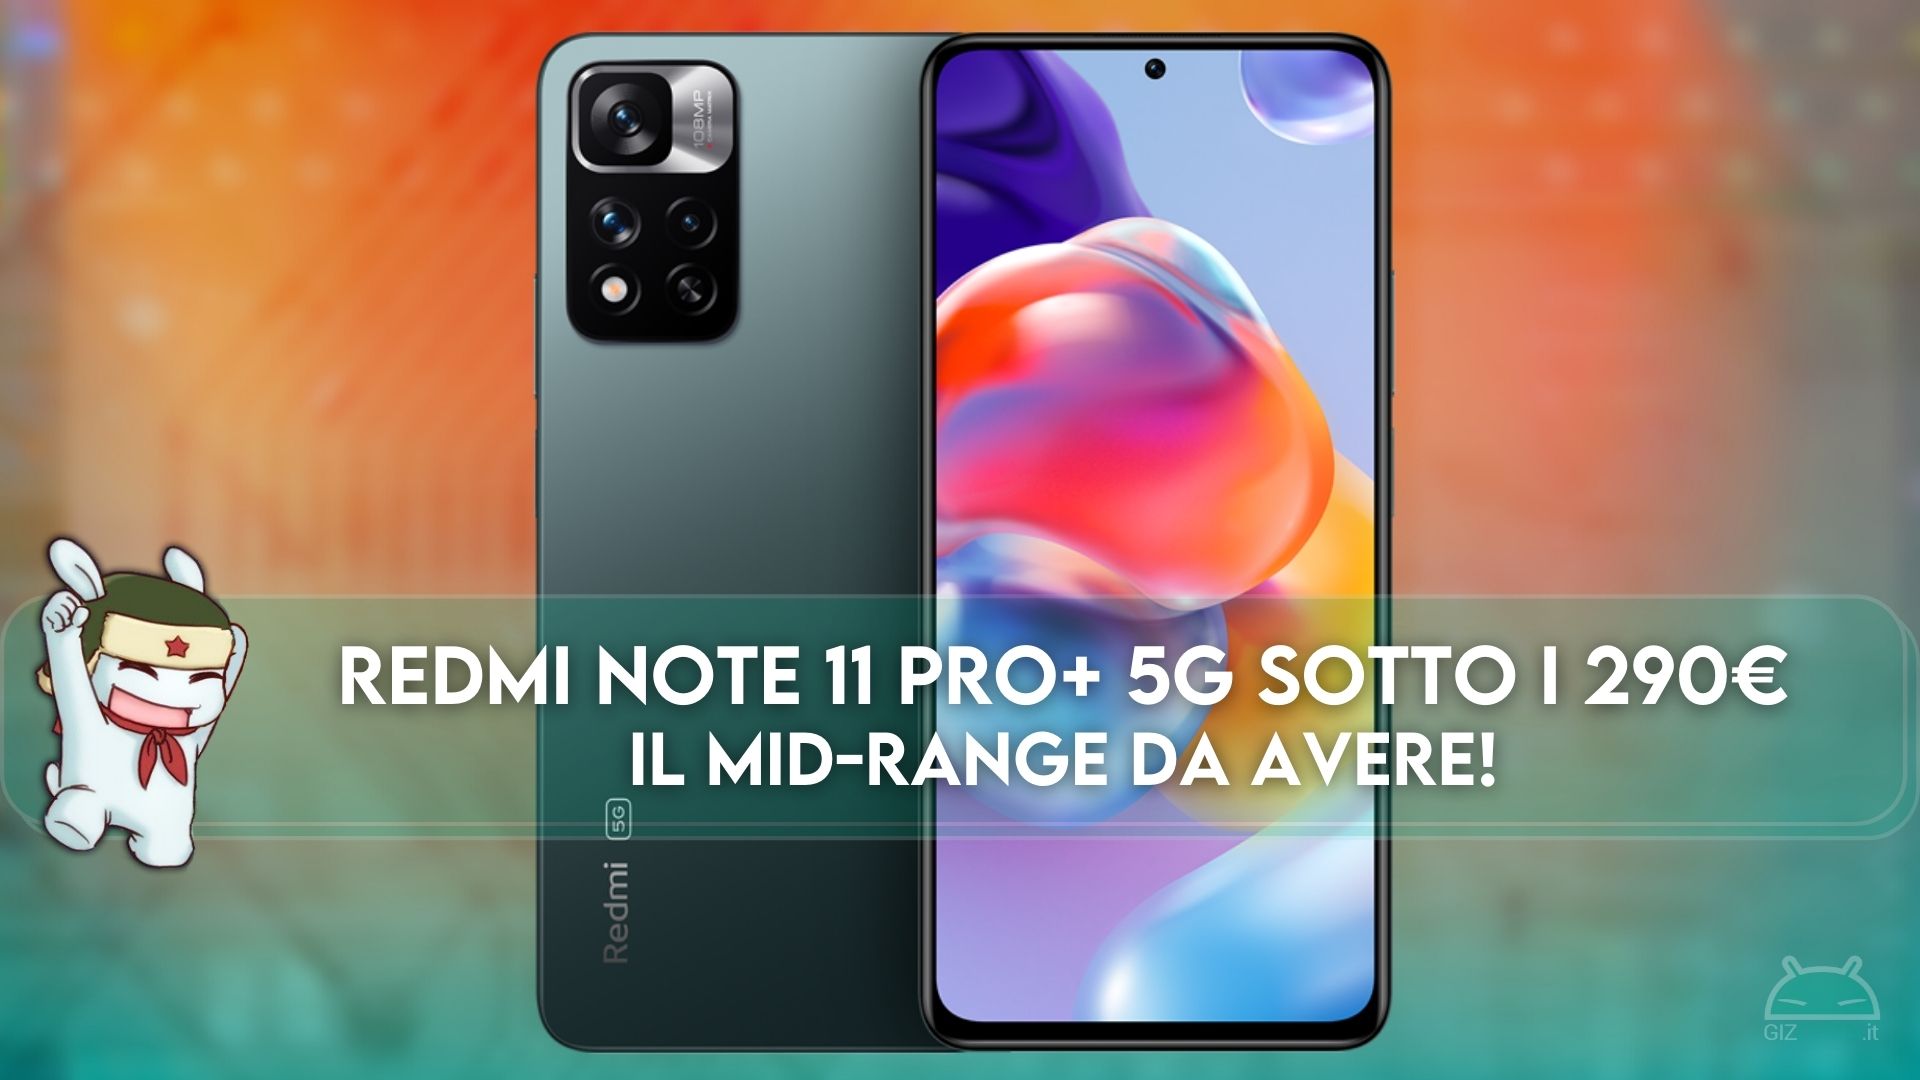 Redmi Note 11 Pro + 5G drops below 290 euros: well, the price is right!